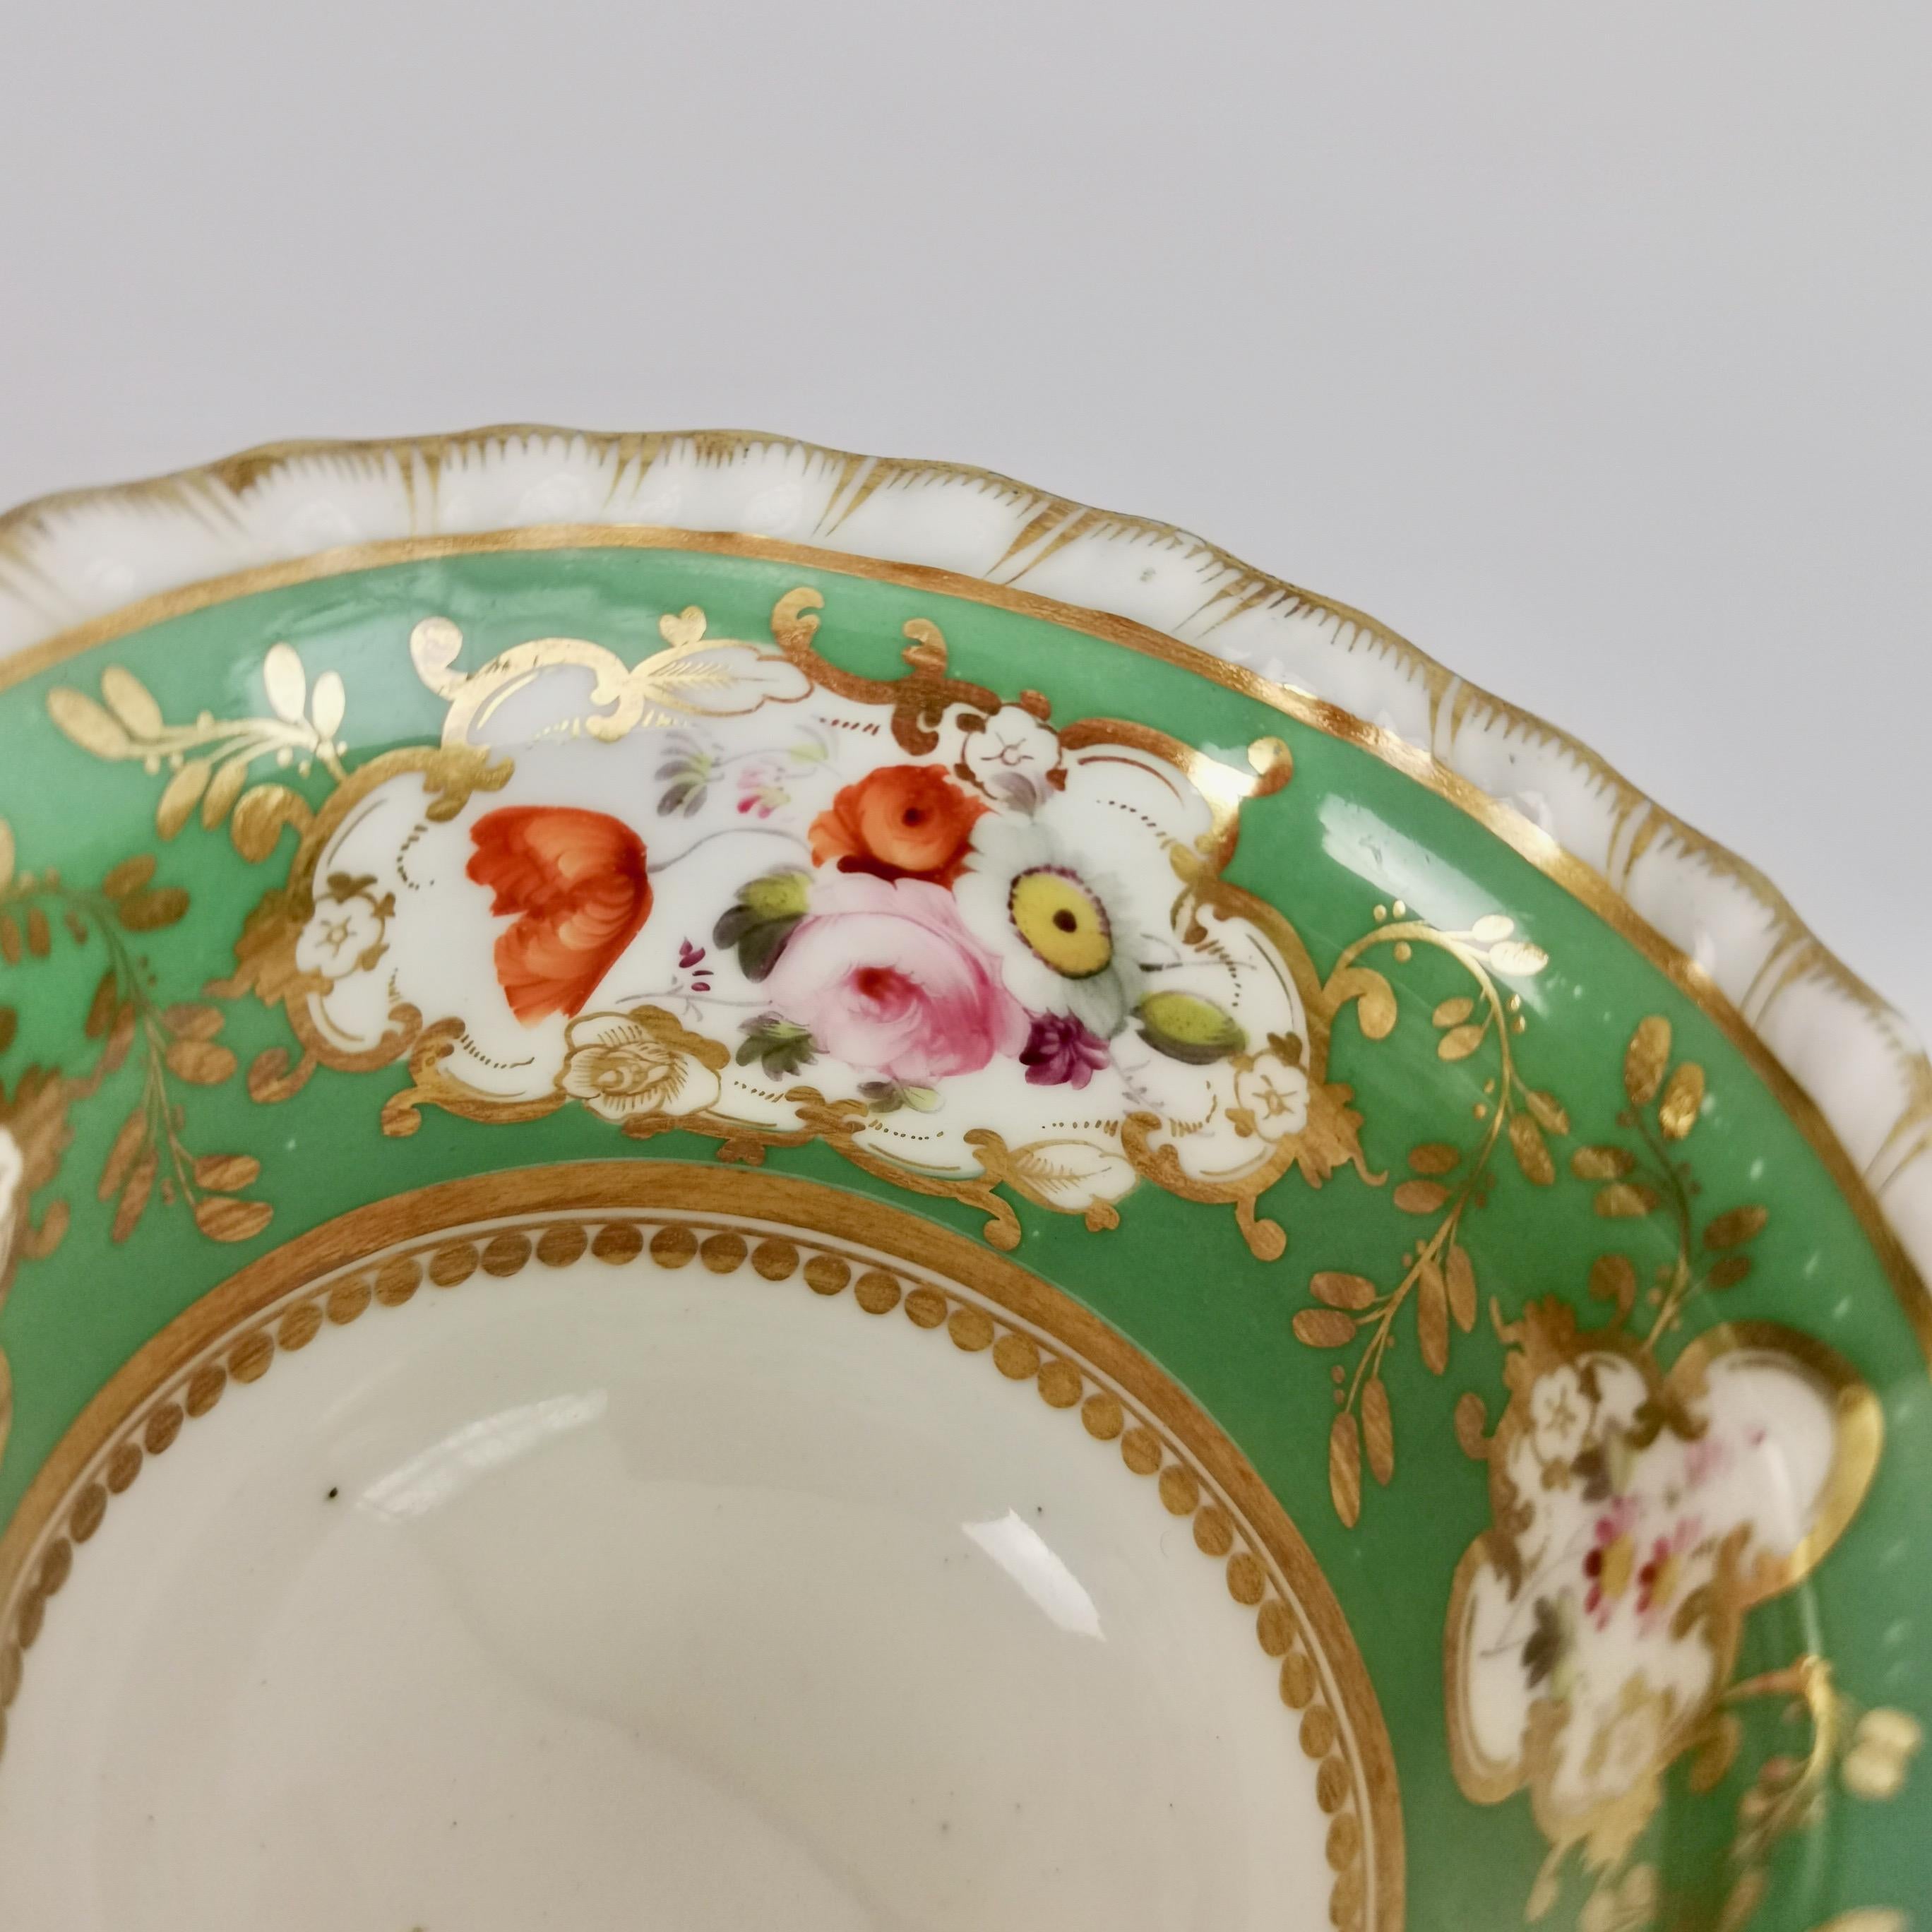 Regency Minton Porcelain Orphaned Coffee Cup, Green with Flowers, ca 1825